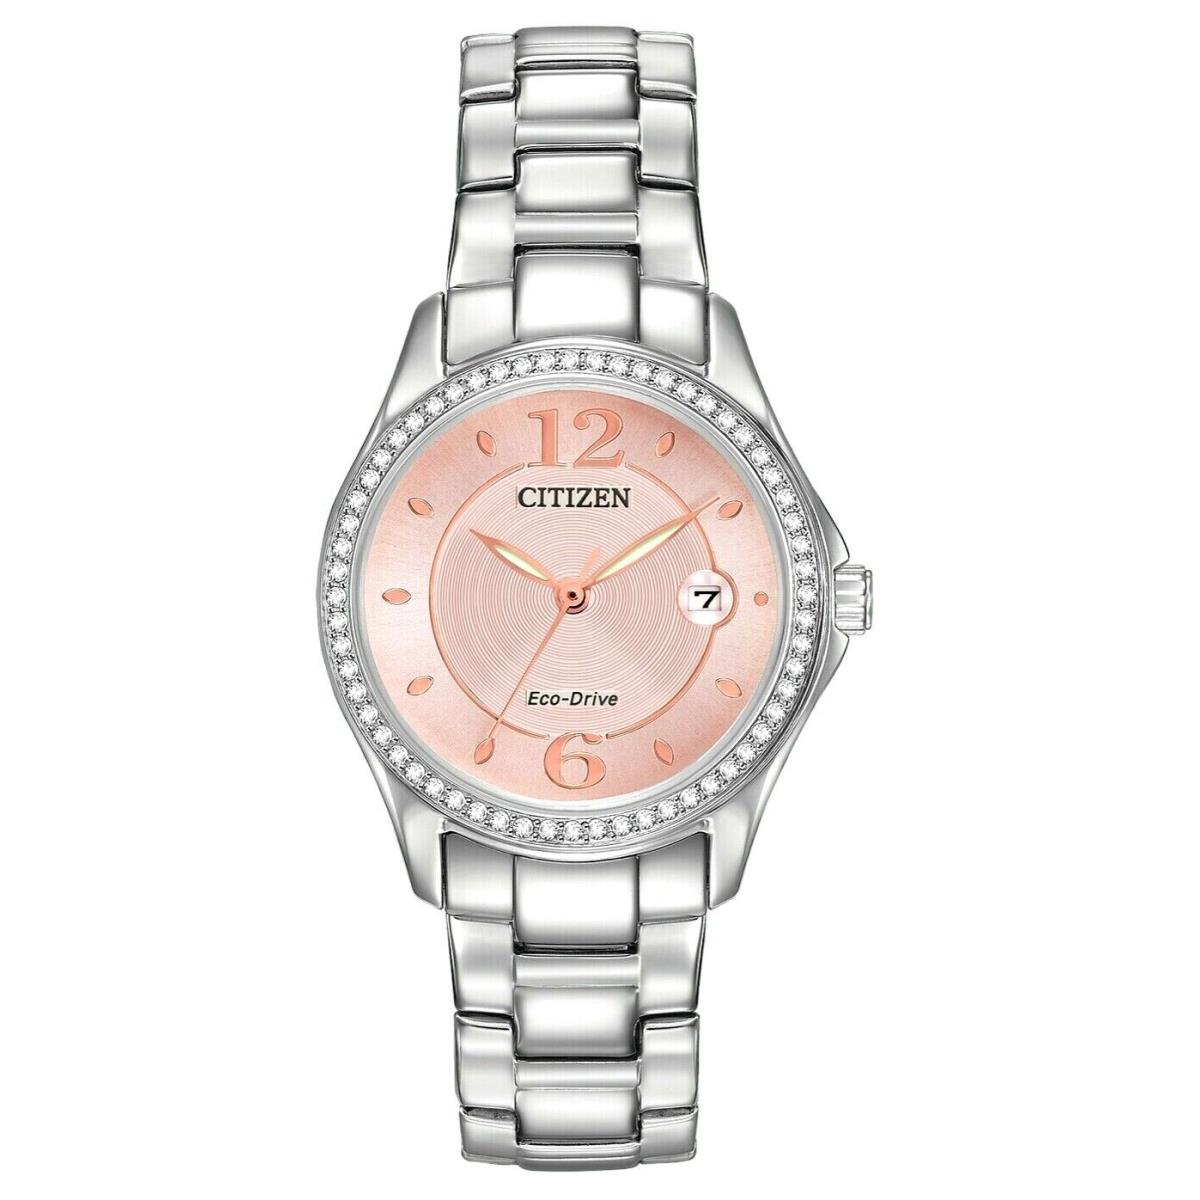 Citizen Eco-drive FE1140-86X Silhouette Crystal Salmon Dial Steel Women`s Watch - Dial: Salmon, Band: Silver